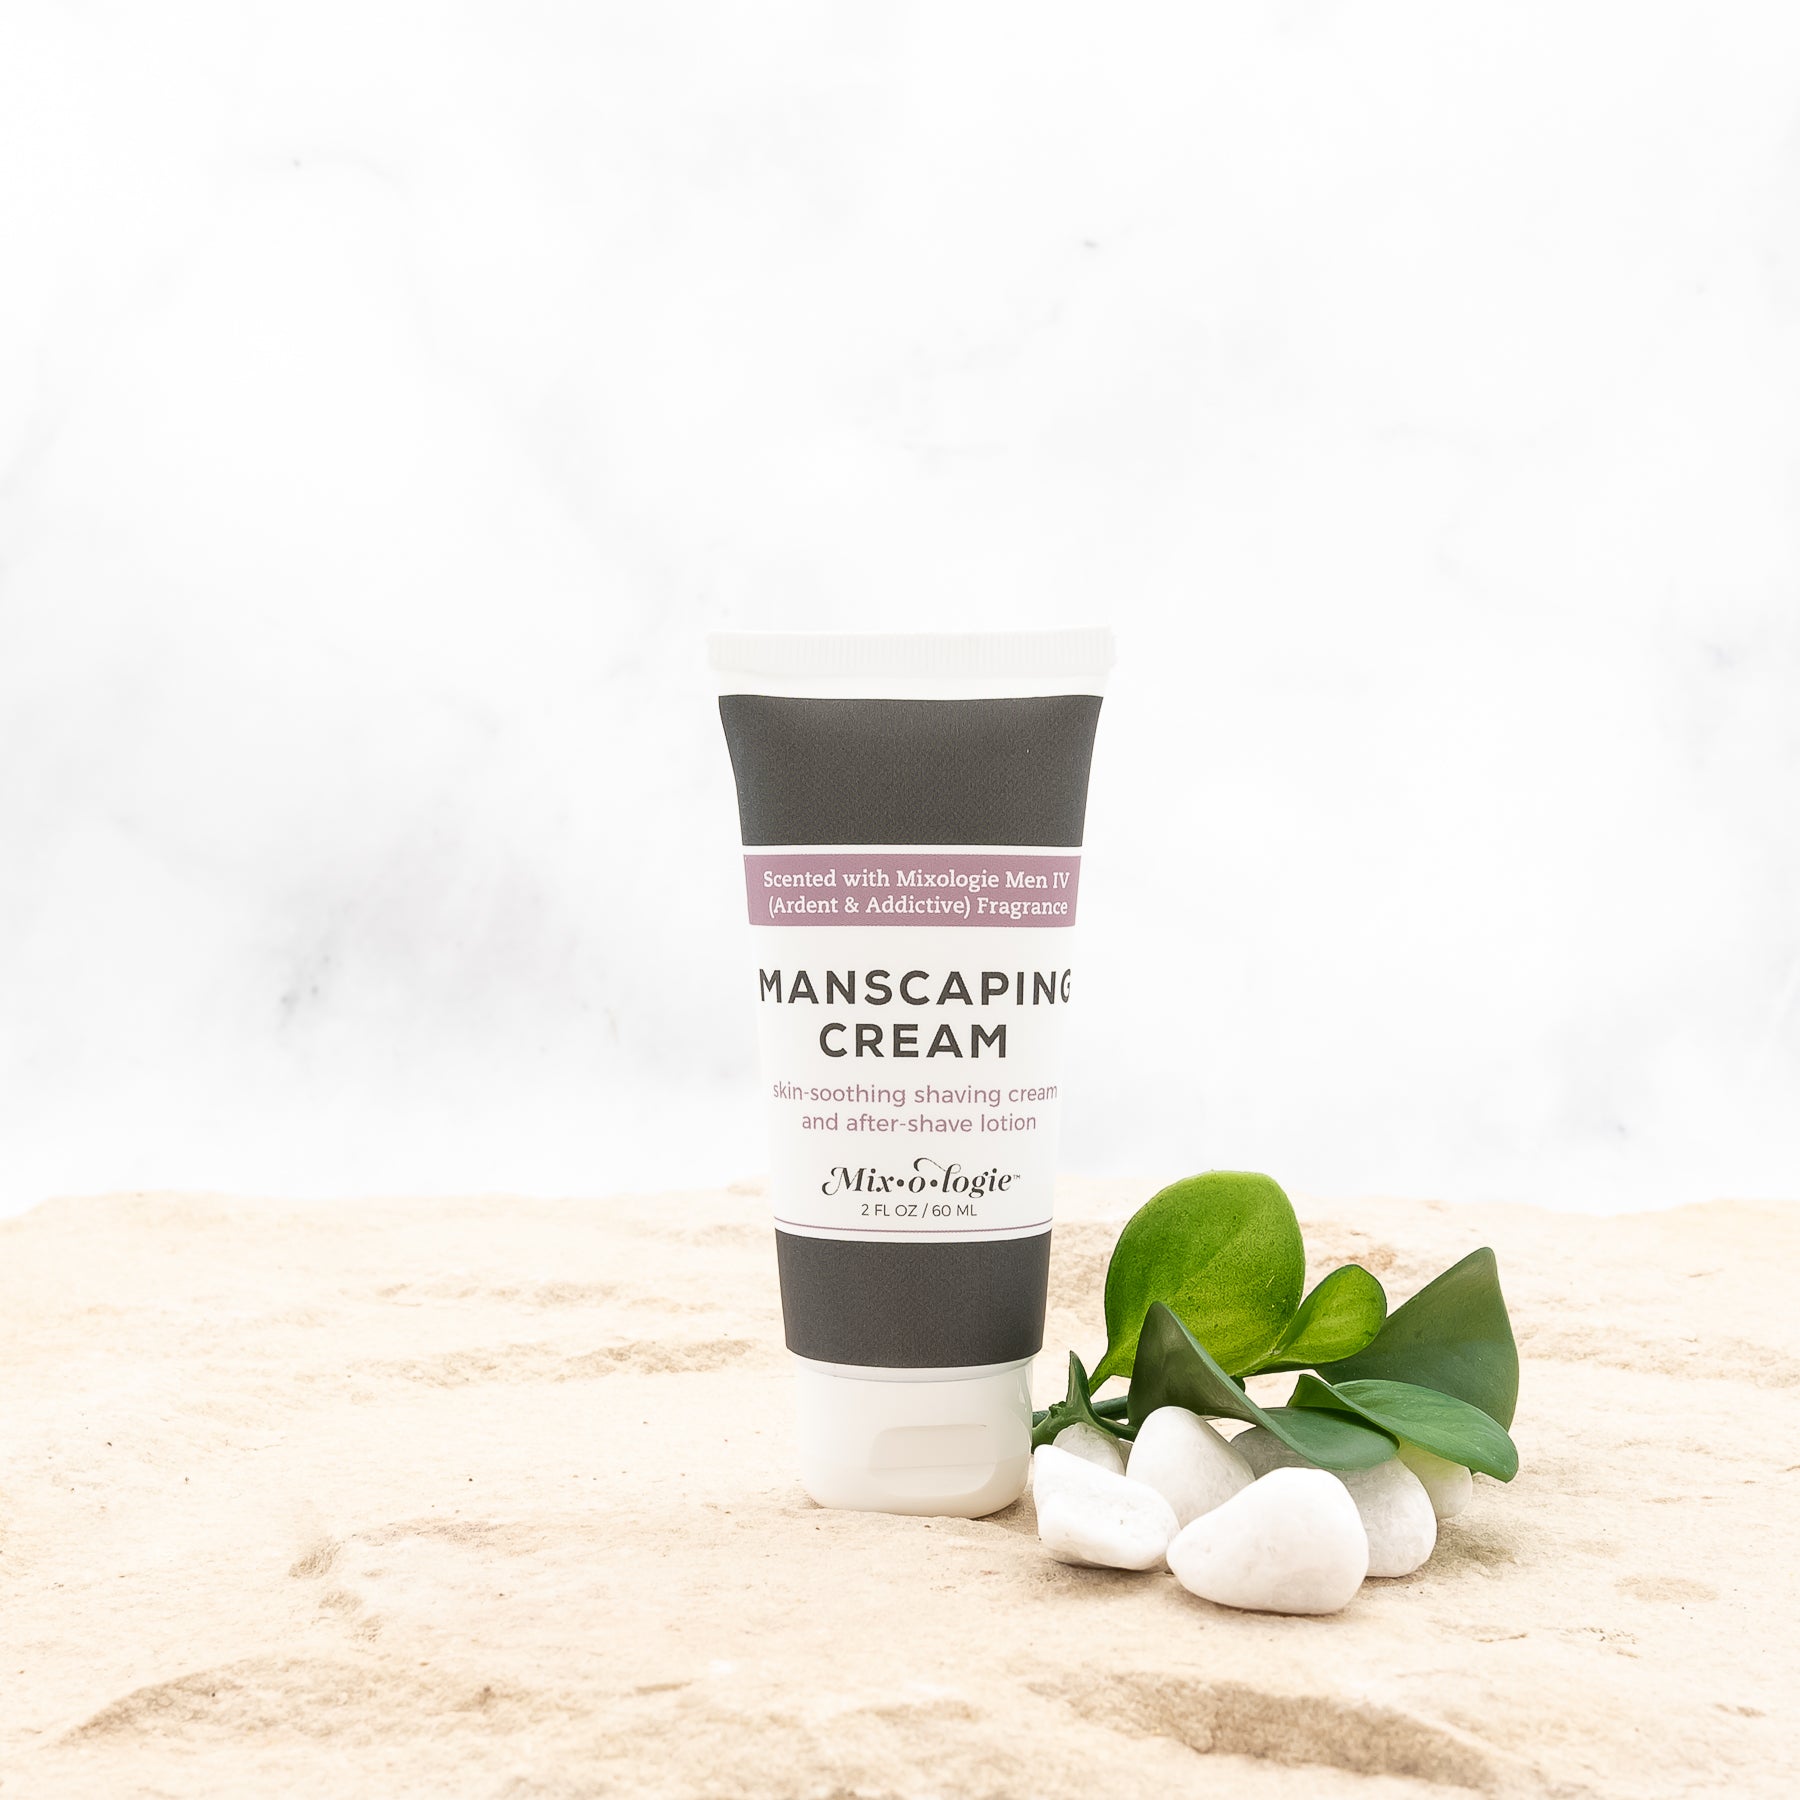 Men’s Manscaping Cream in Men’s IV (Ardent & Addictive) in a black and white tube with salmon colored accents. Skin-soothing shaving cream and after-shave lotion. 2 fl oz or 60 mL. Pictured in sand with rocks and greenery.